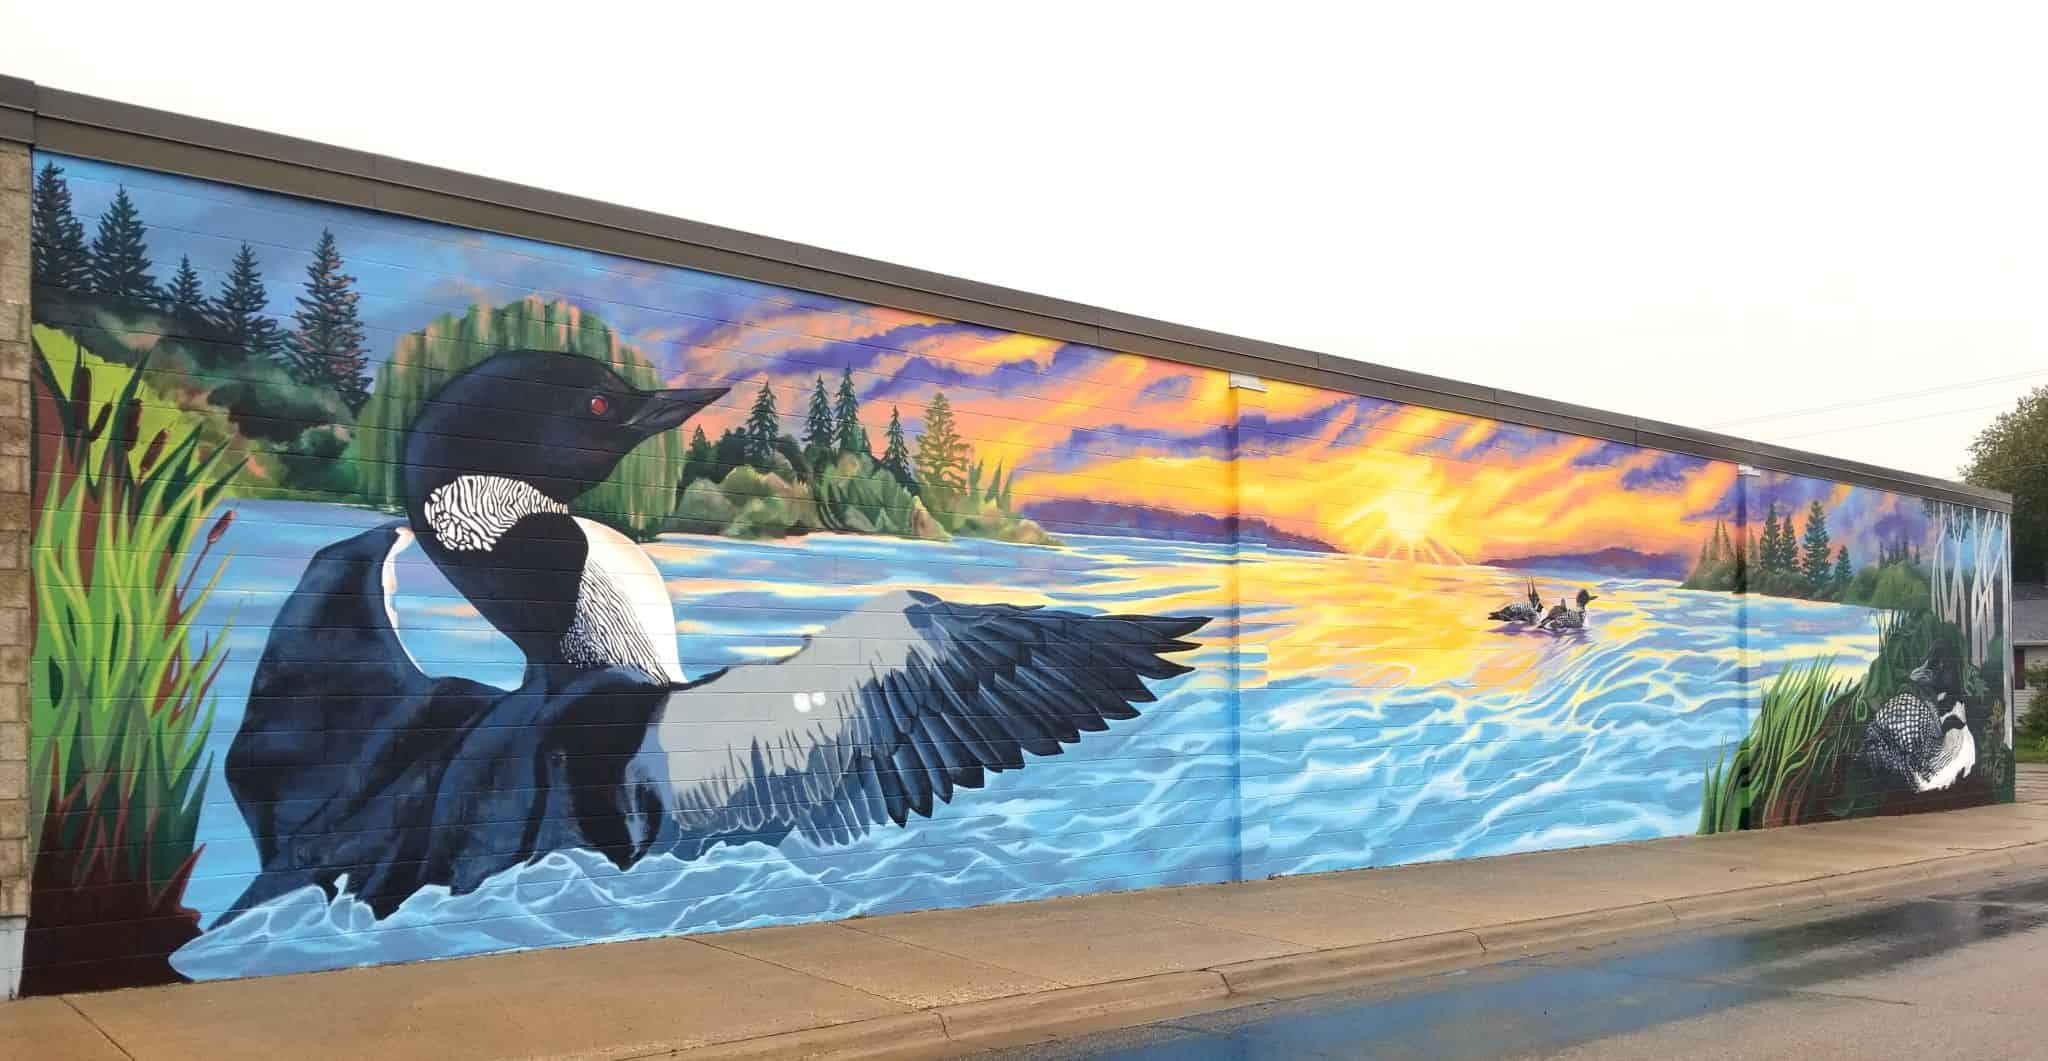 "The Dream" mural on the wall of Noah's Home Furnishings • the sunset and loon scene • Artist: Aryn Lill